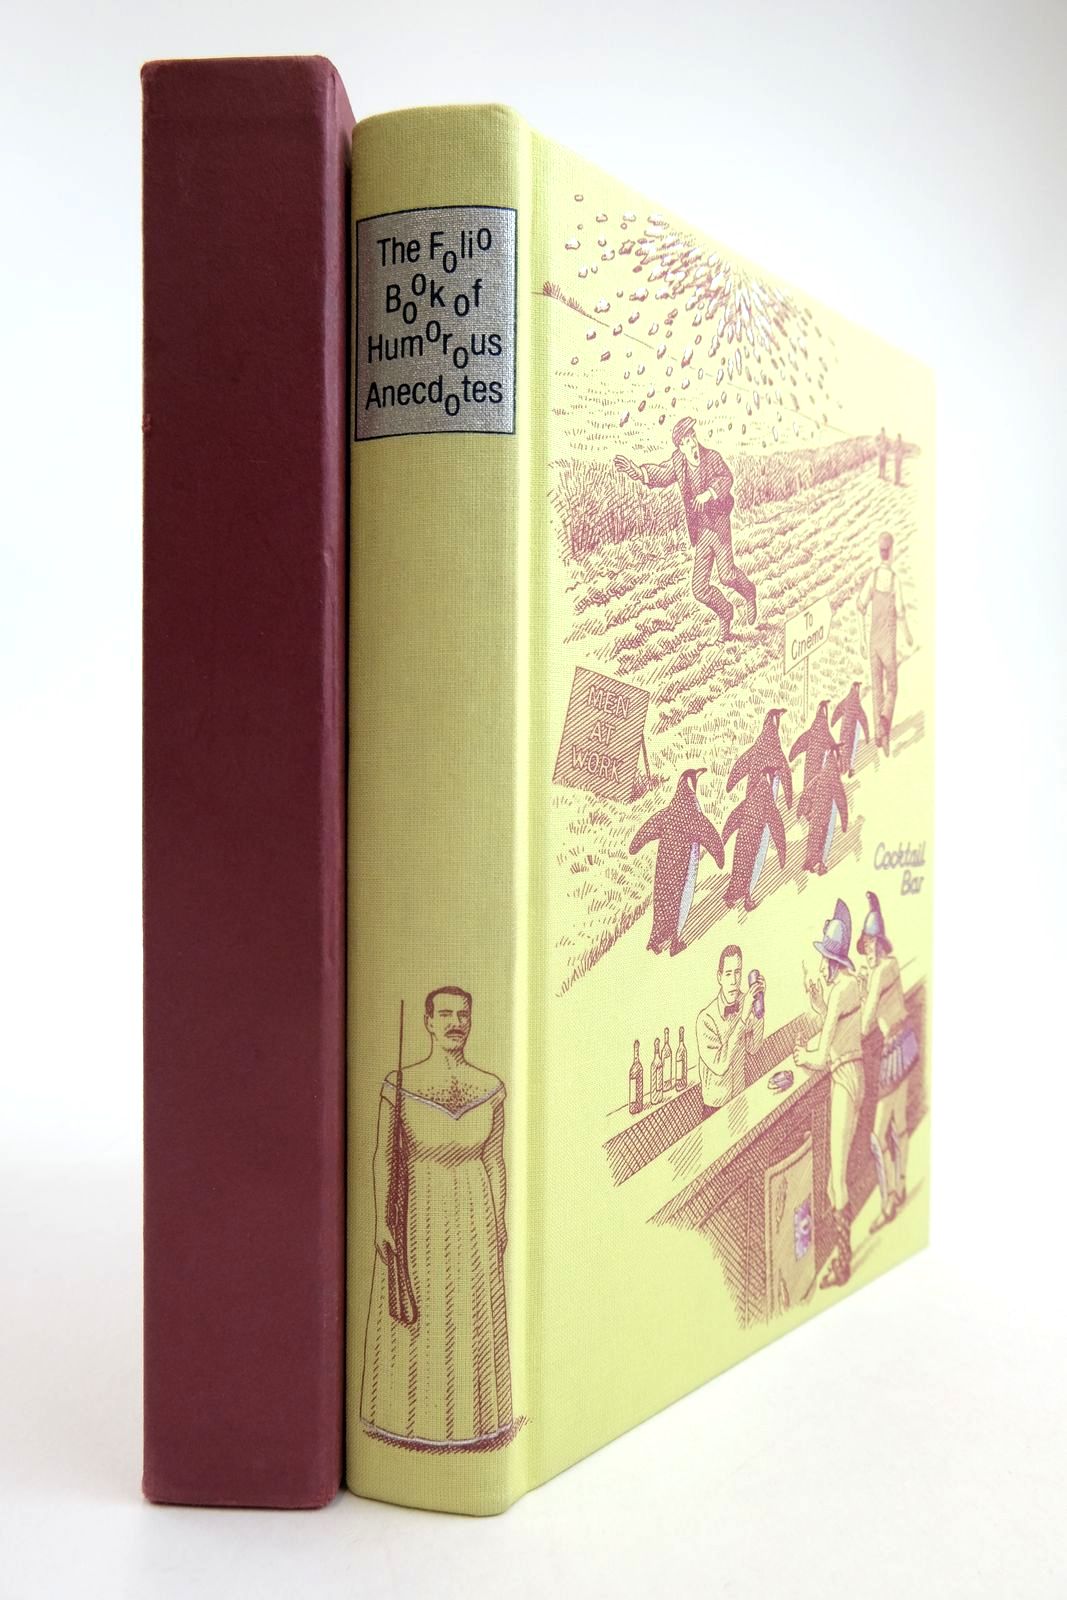 Photo of THE FOLIO BOOK OF HUMOROUS ANECDOTES written by Leeson, Edward illustrated by Hardcastle, Nick published by Folio Society (STOCK CODE: 2134230)  for sale by Stella & Rose's Books